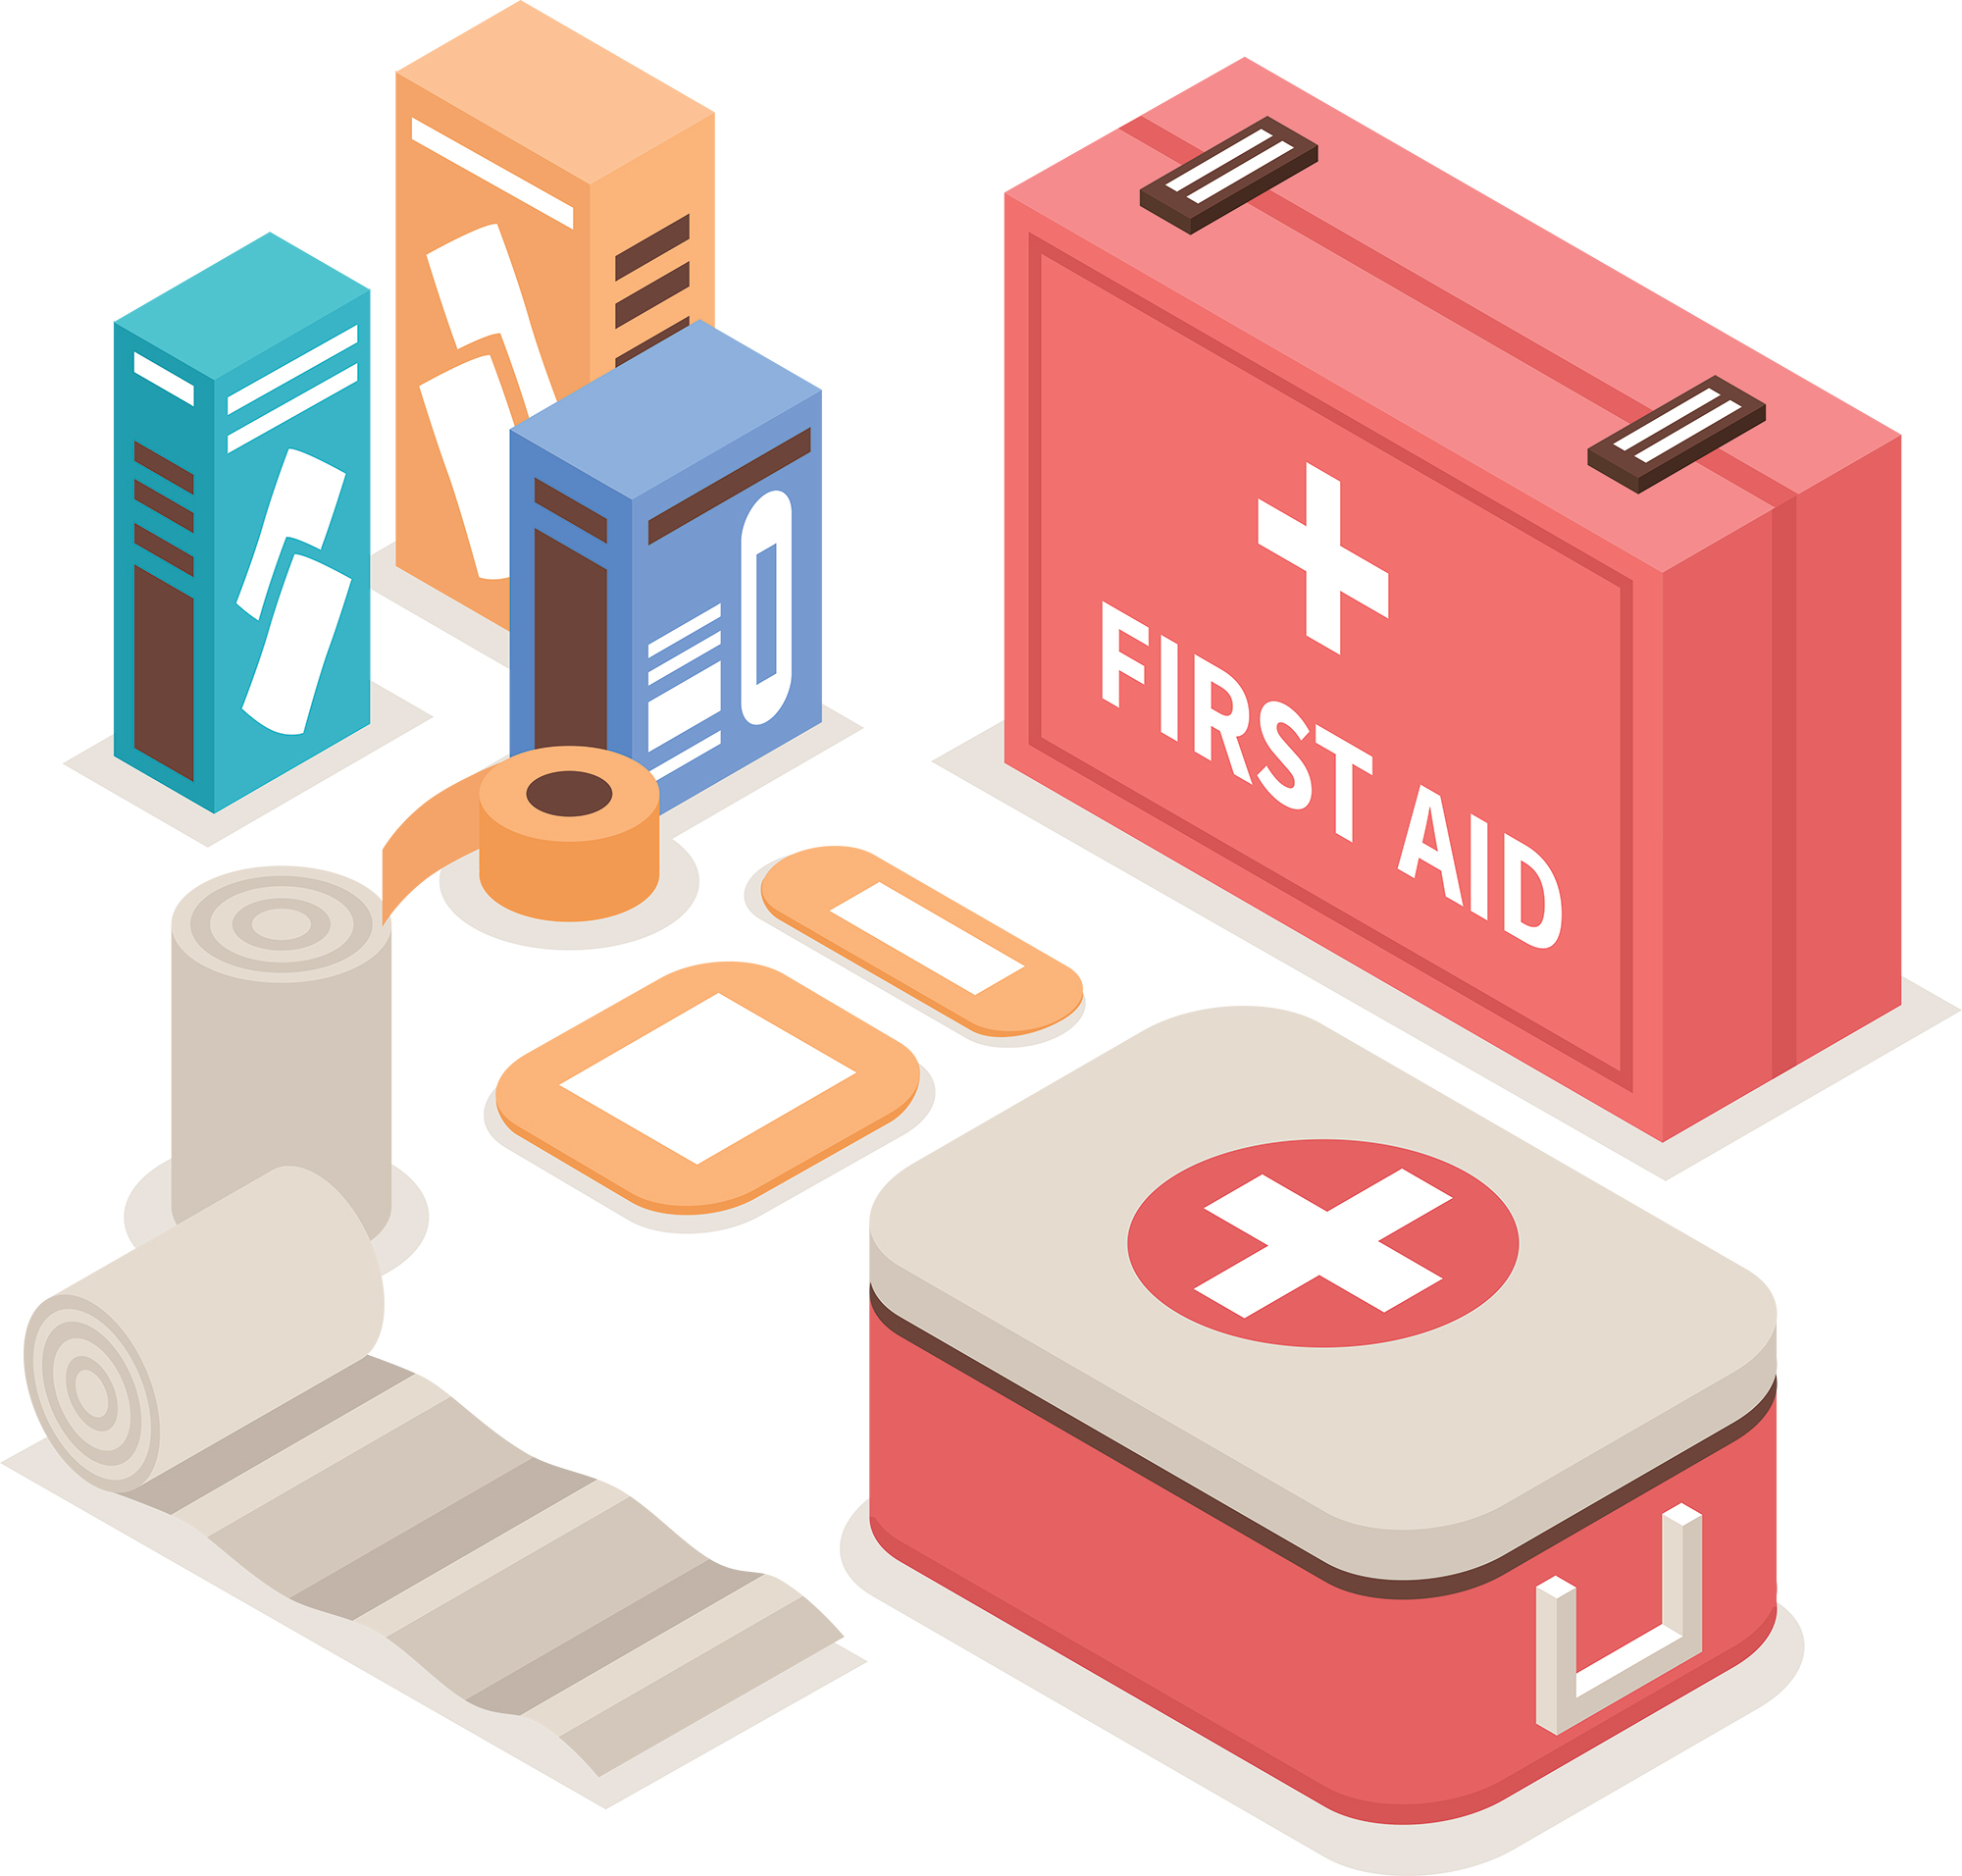 First Aid Kit Graphic